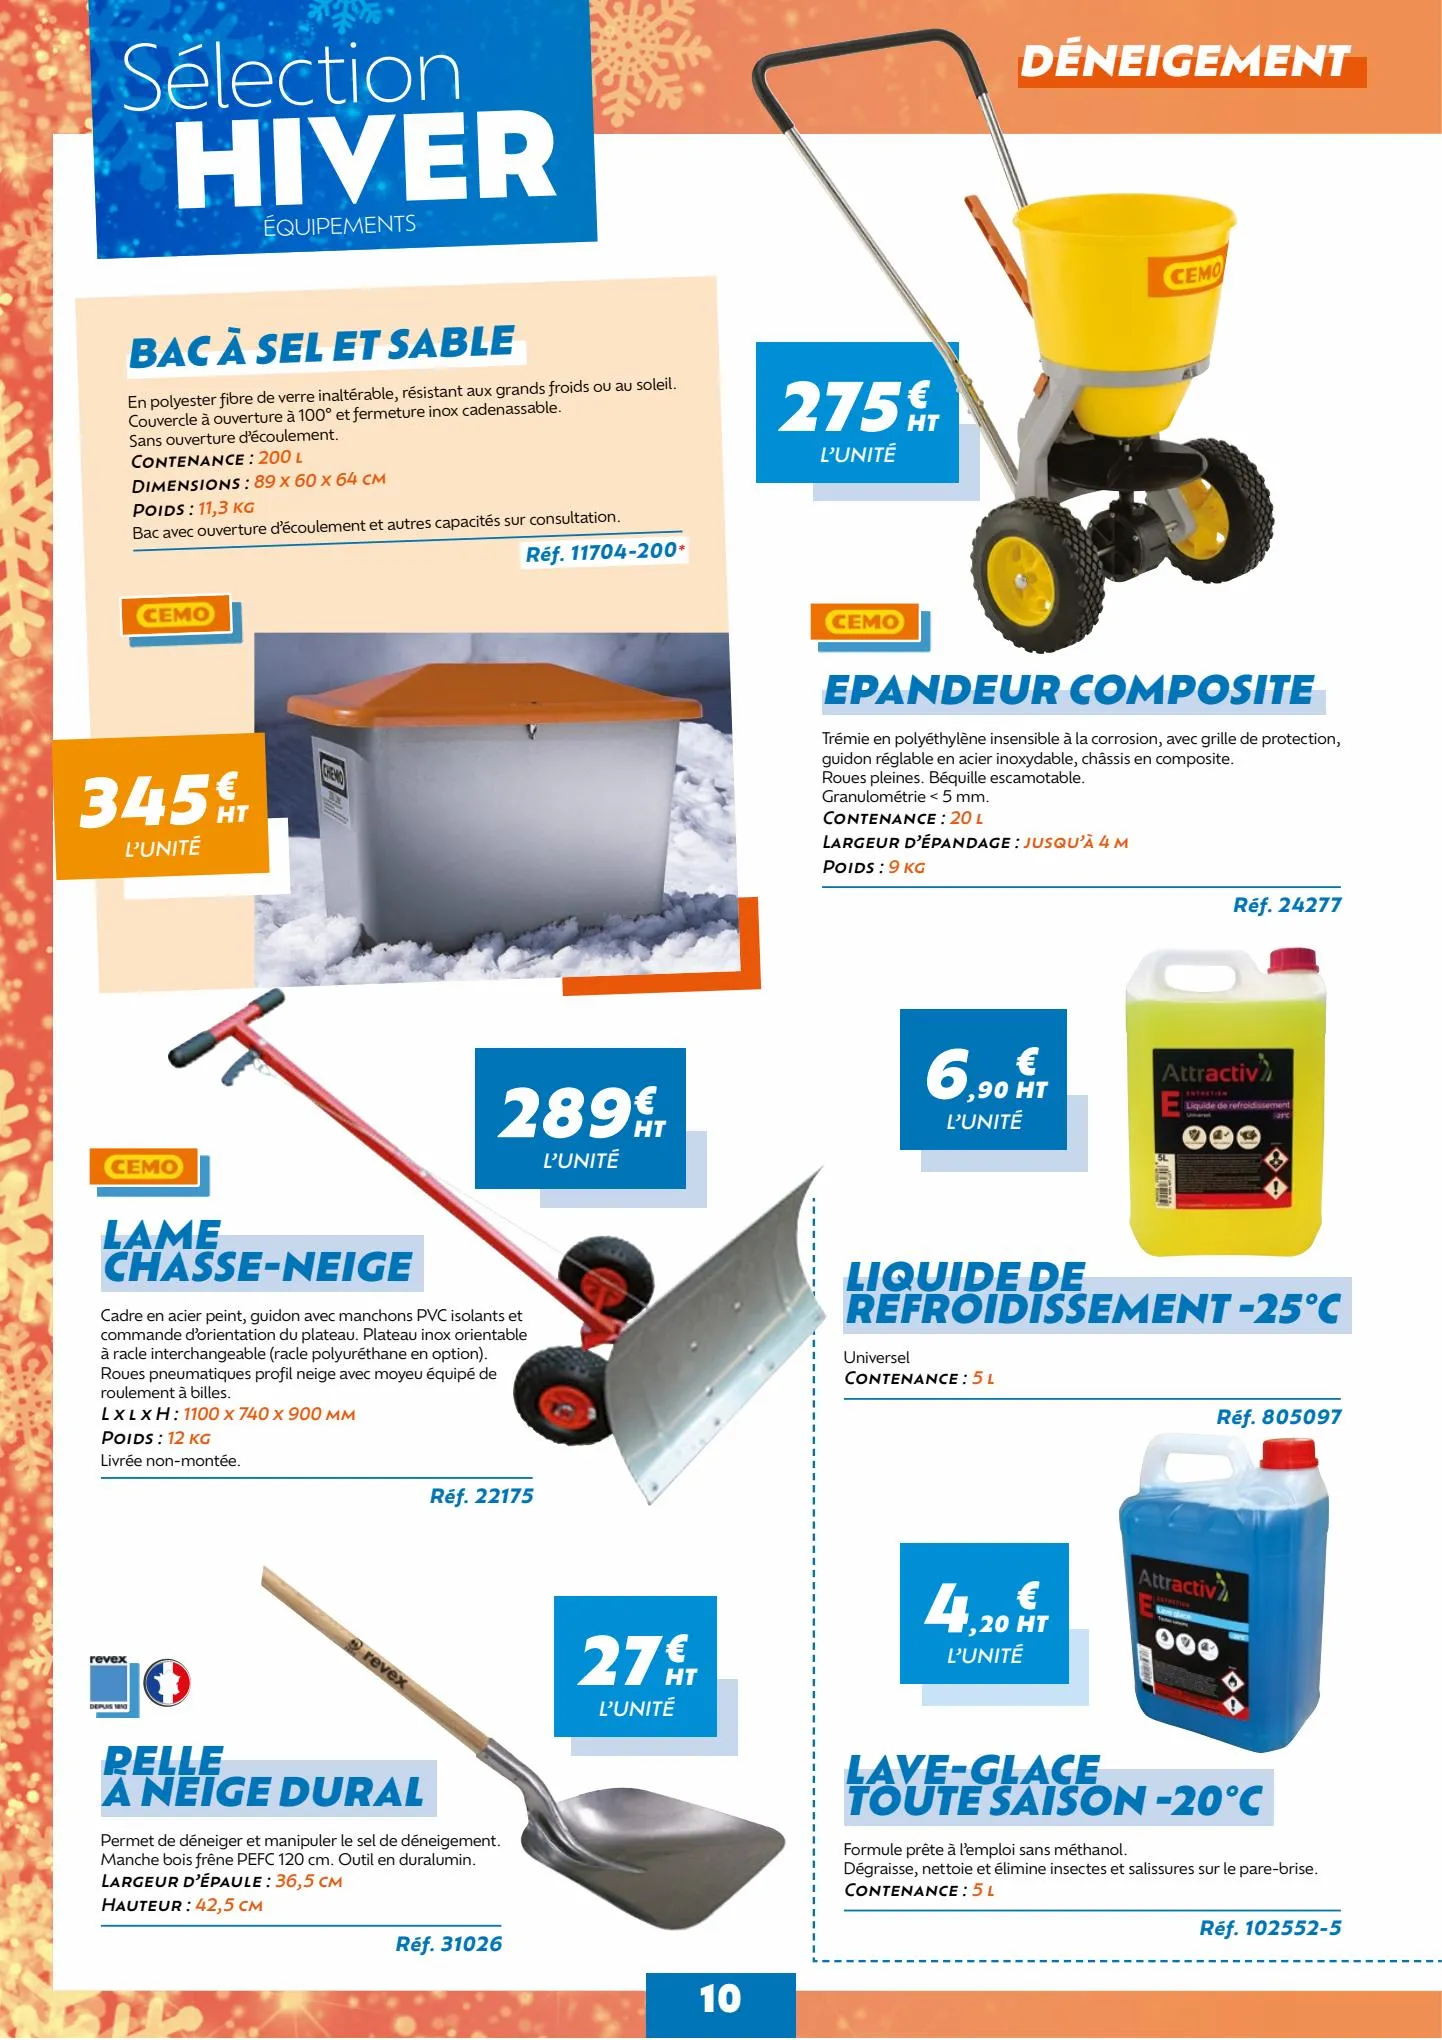 Catalogue Selection hiver 2022 equipements, page 00010